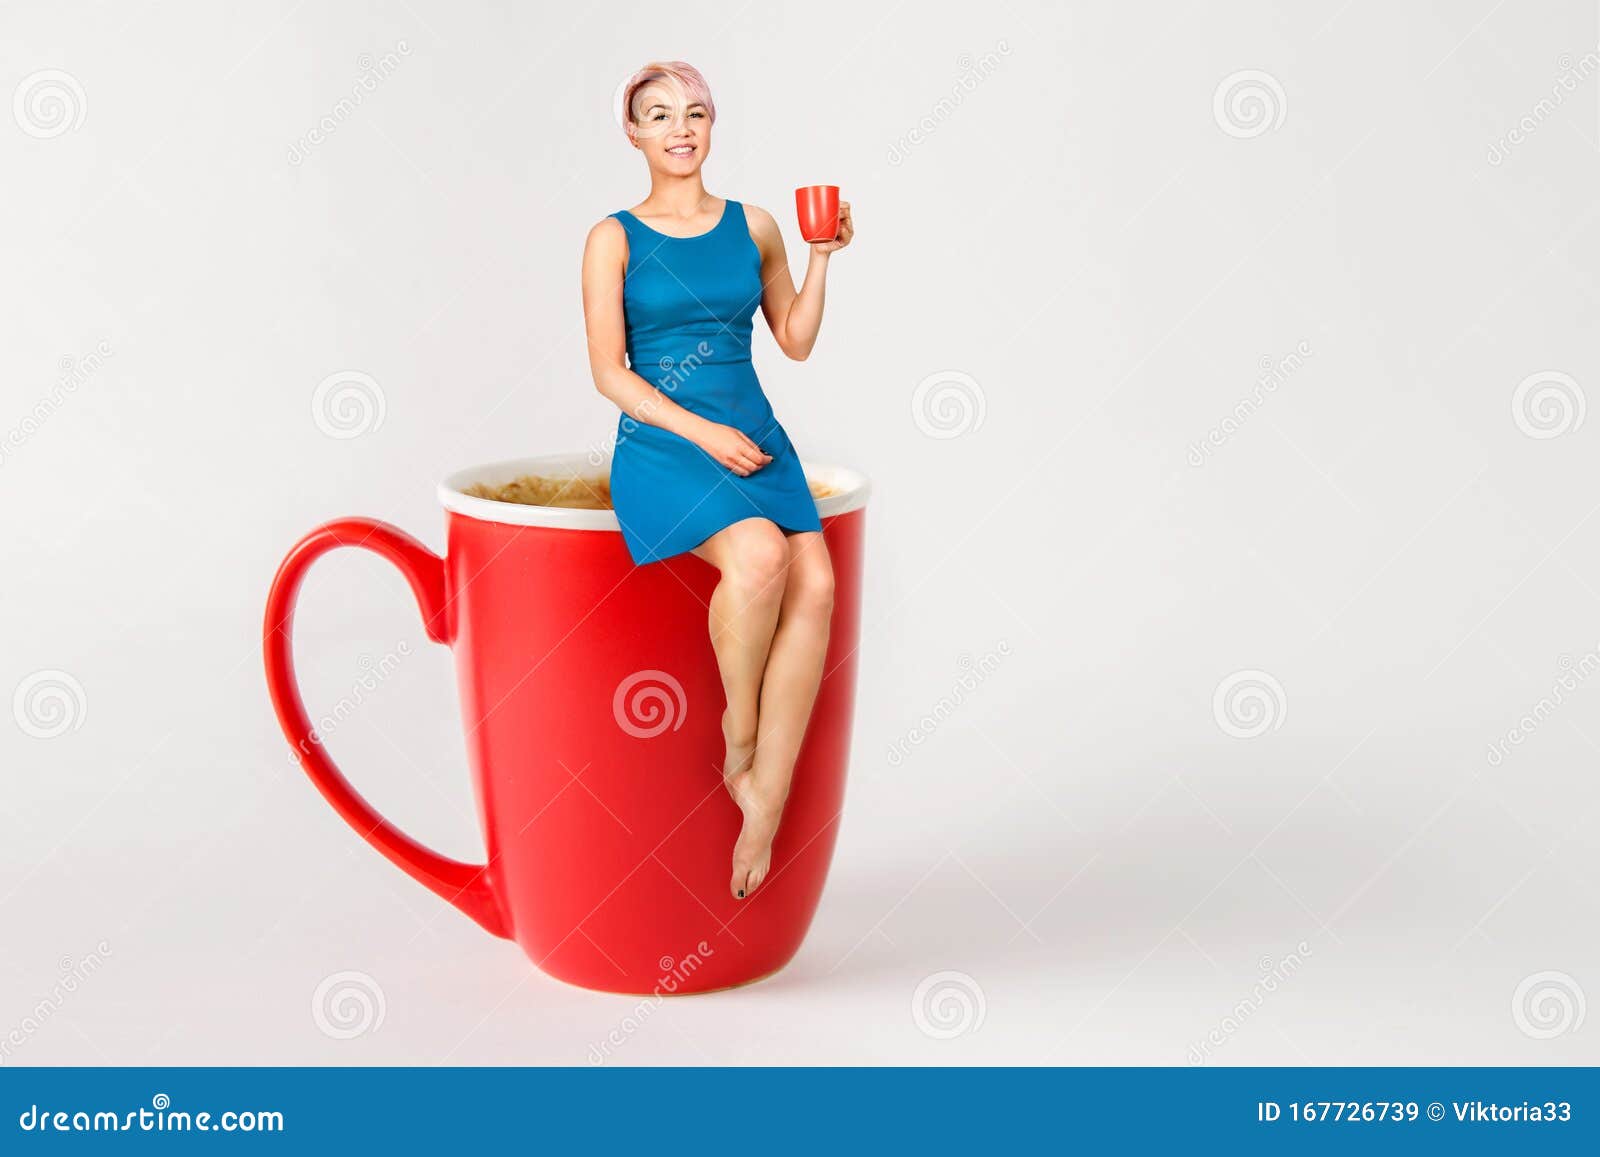 young-beautiful-girl-sits-big-cup-coffee-drinks-light-background-167726739.jpg